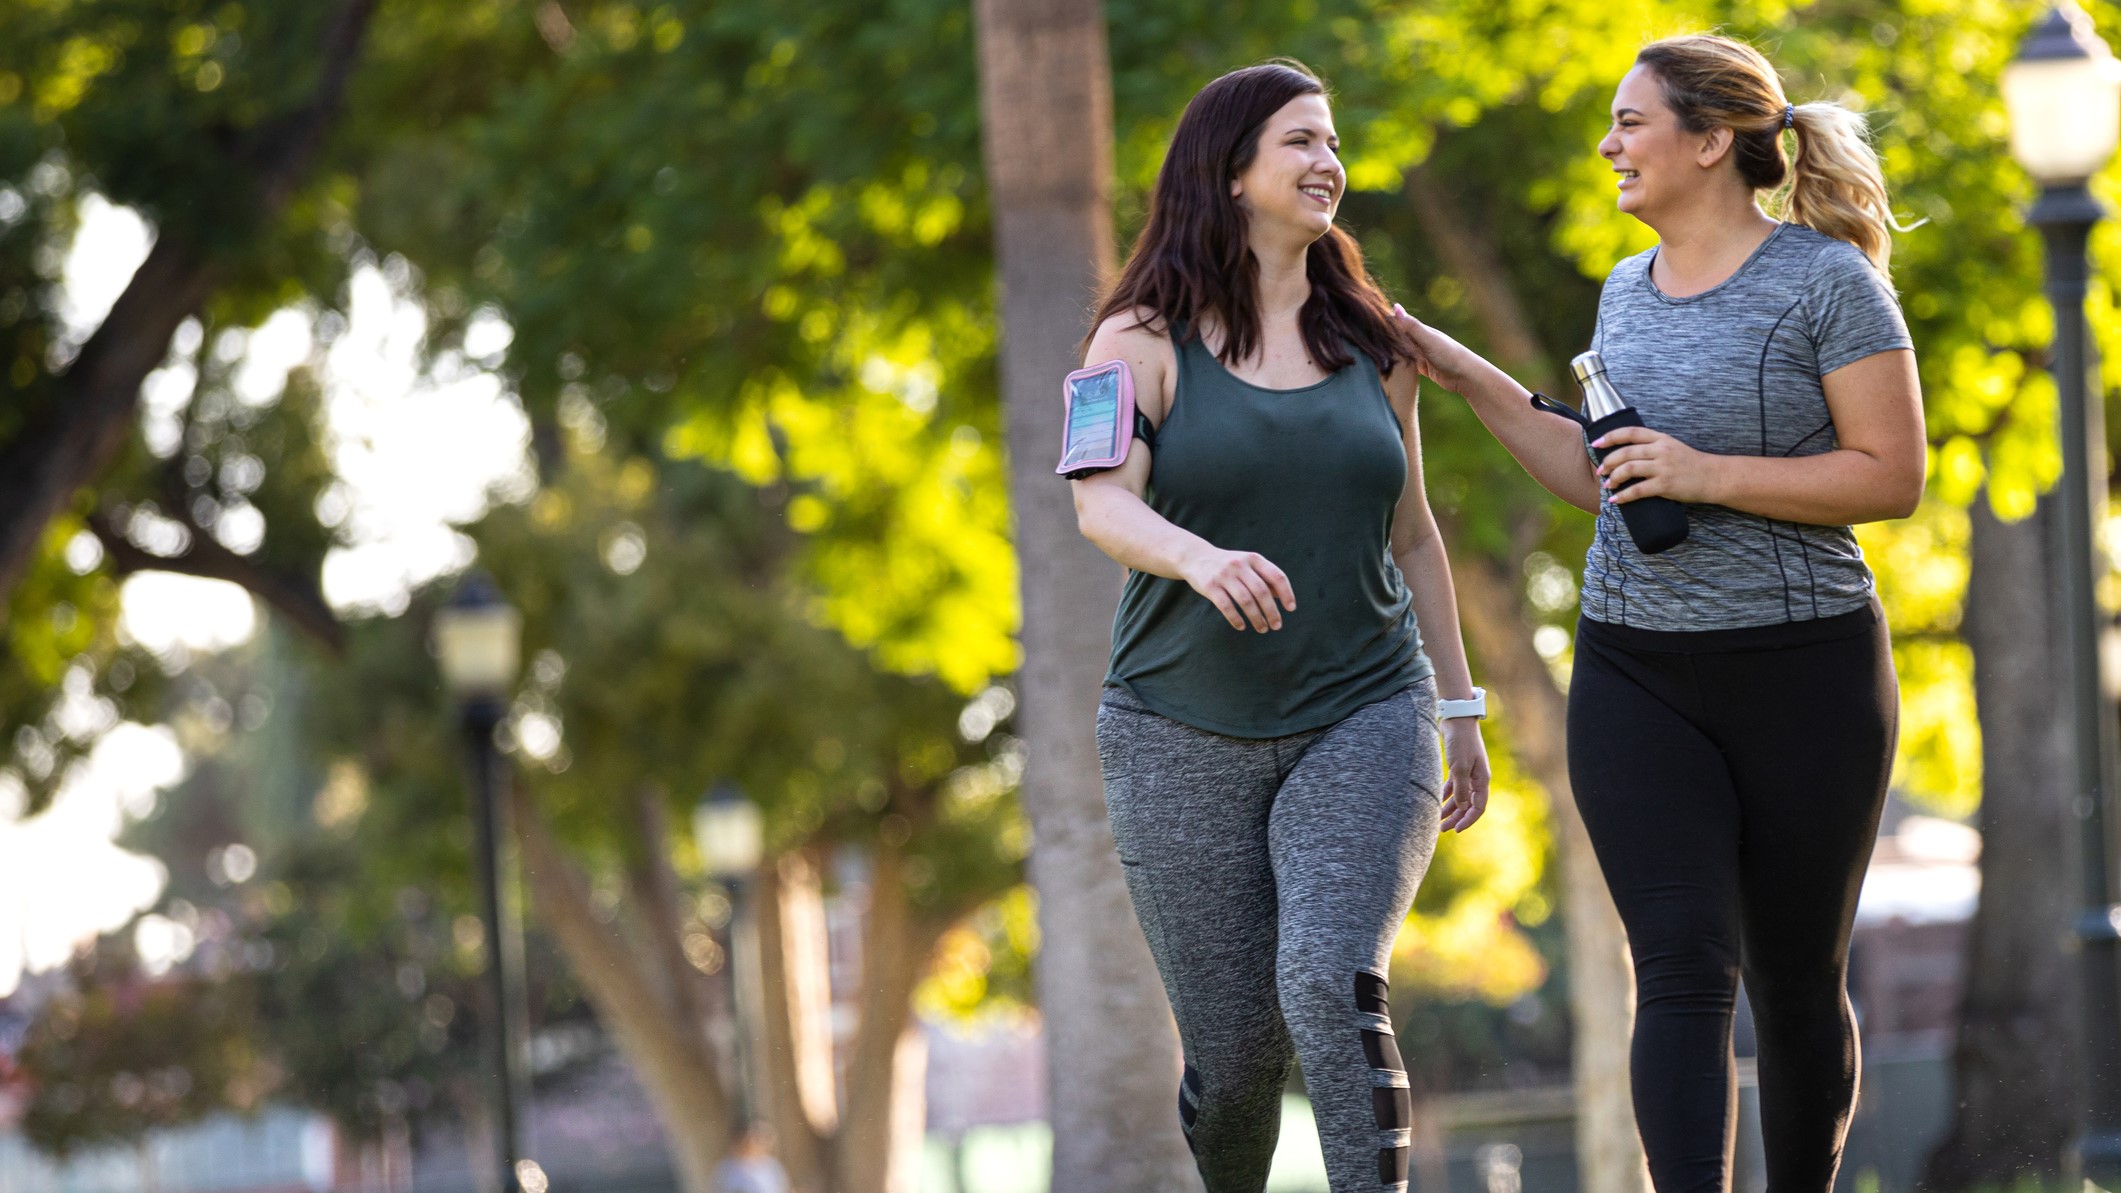 How to lose weight and get in shape by walking